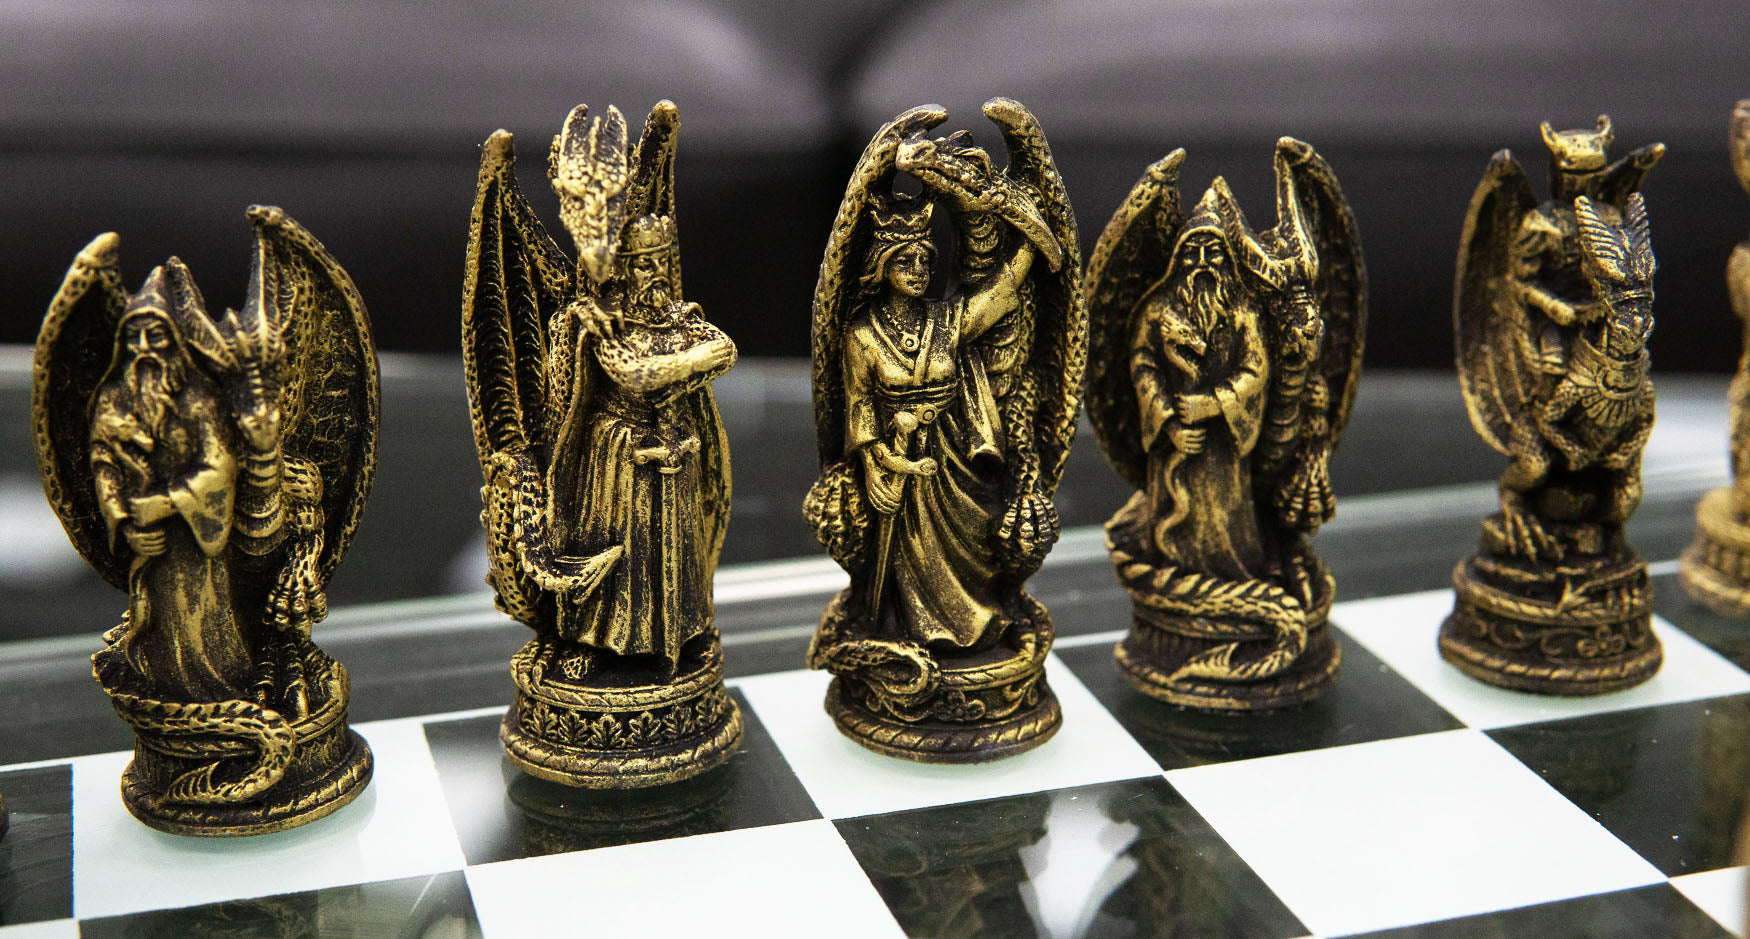 Ebros Gift Silver Gold Fantasy Dungeons And Dragons Resin Chess Pieces With Glass Board Set